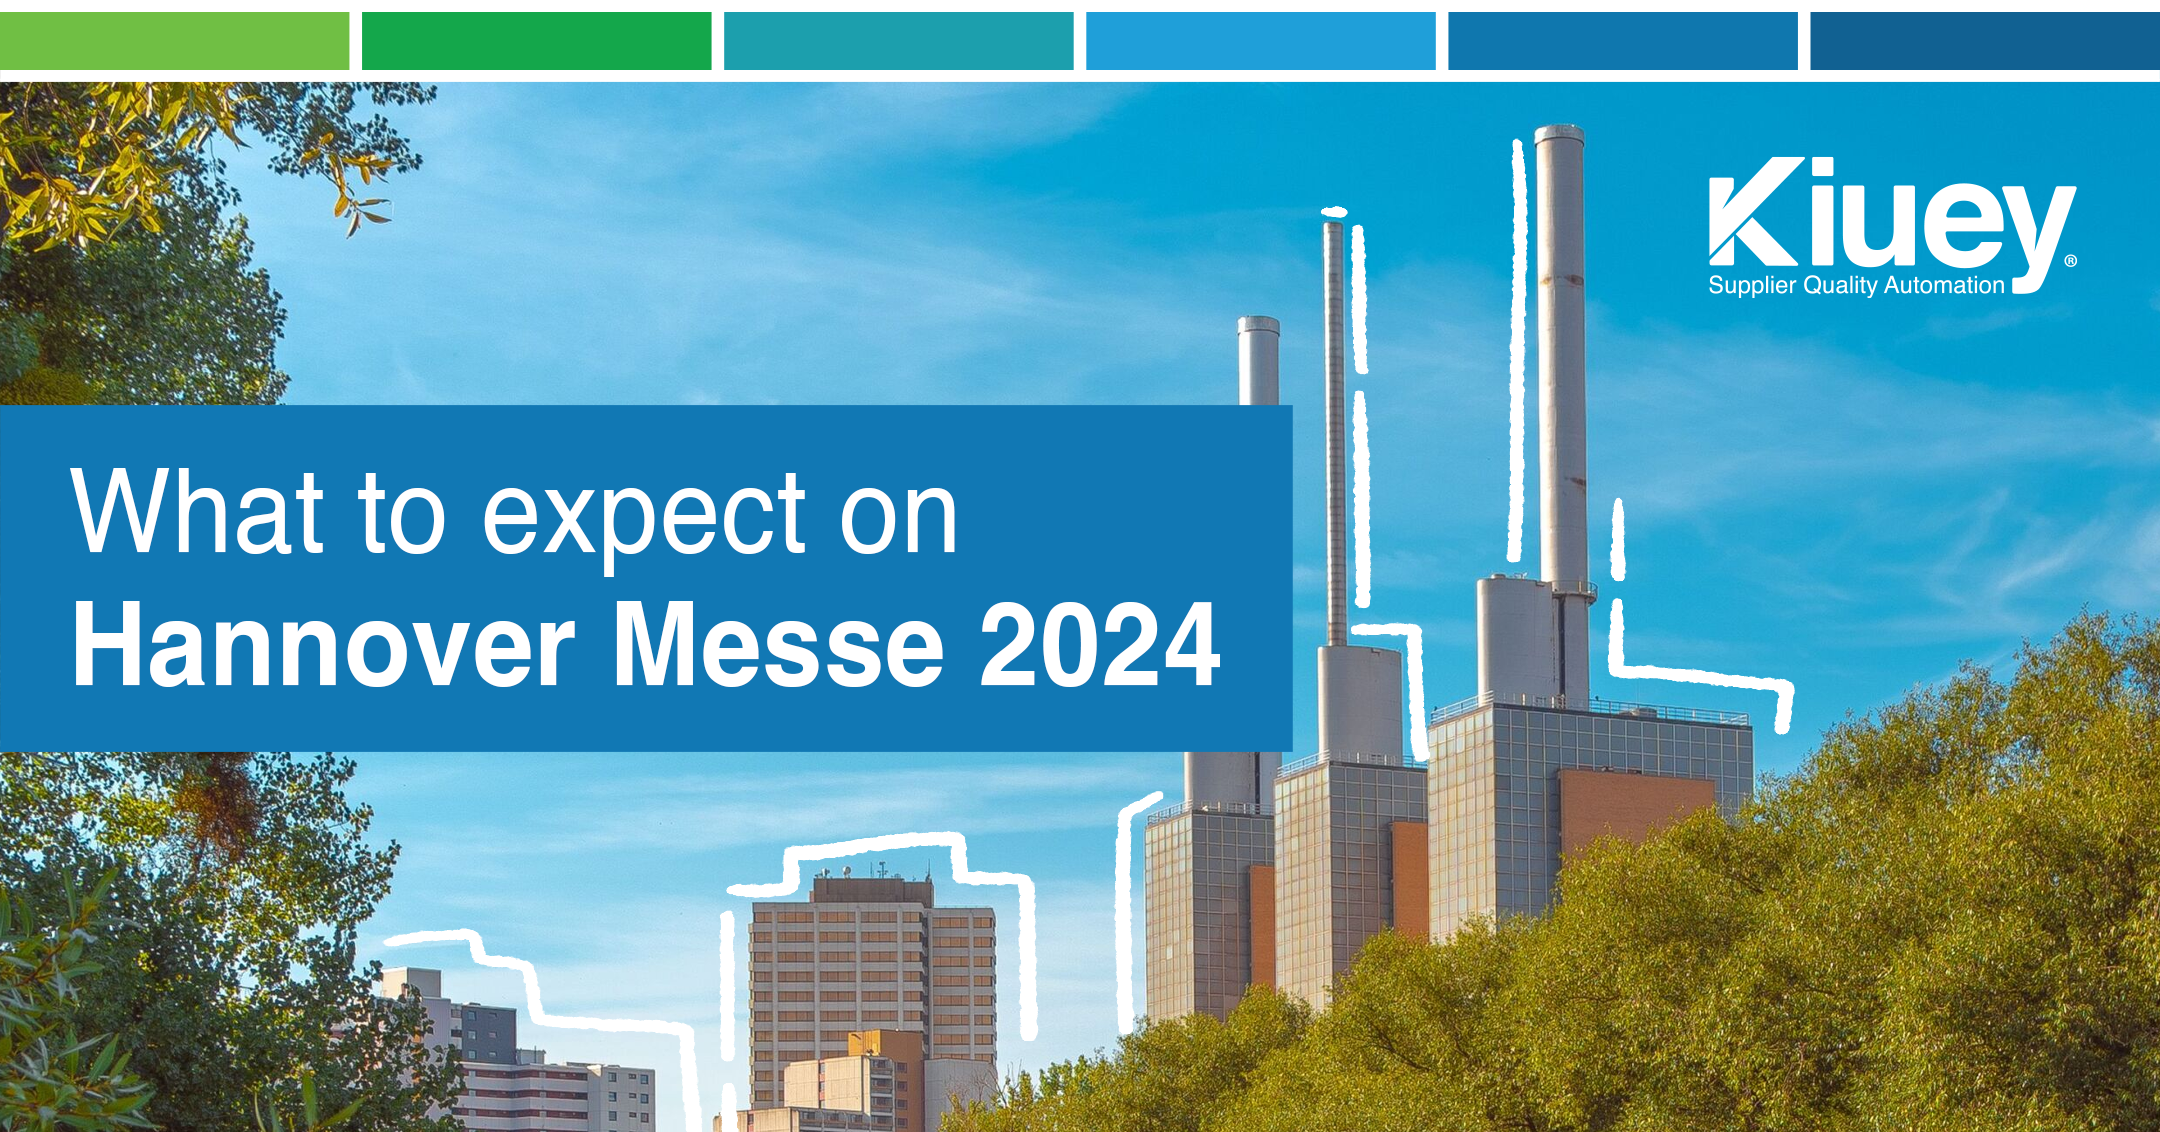 What to expect on Hannover Messe 2024 (besides meeting with Kiuey)